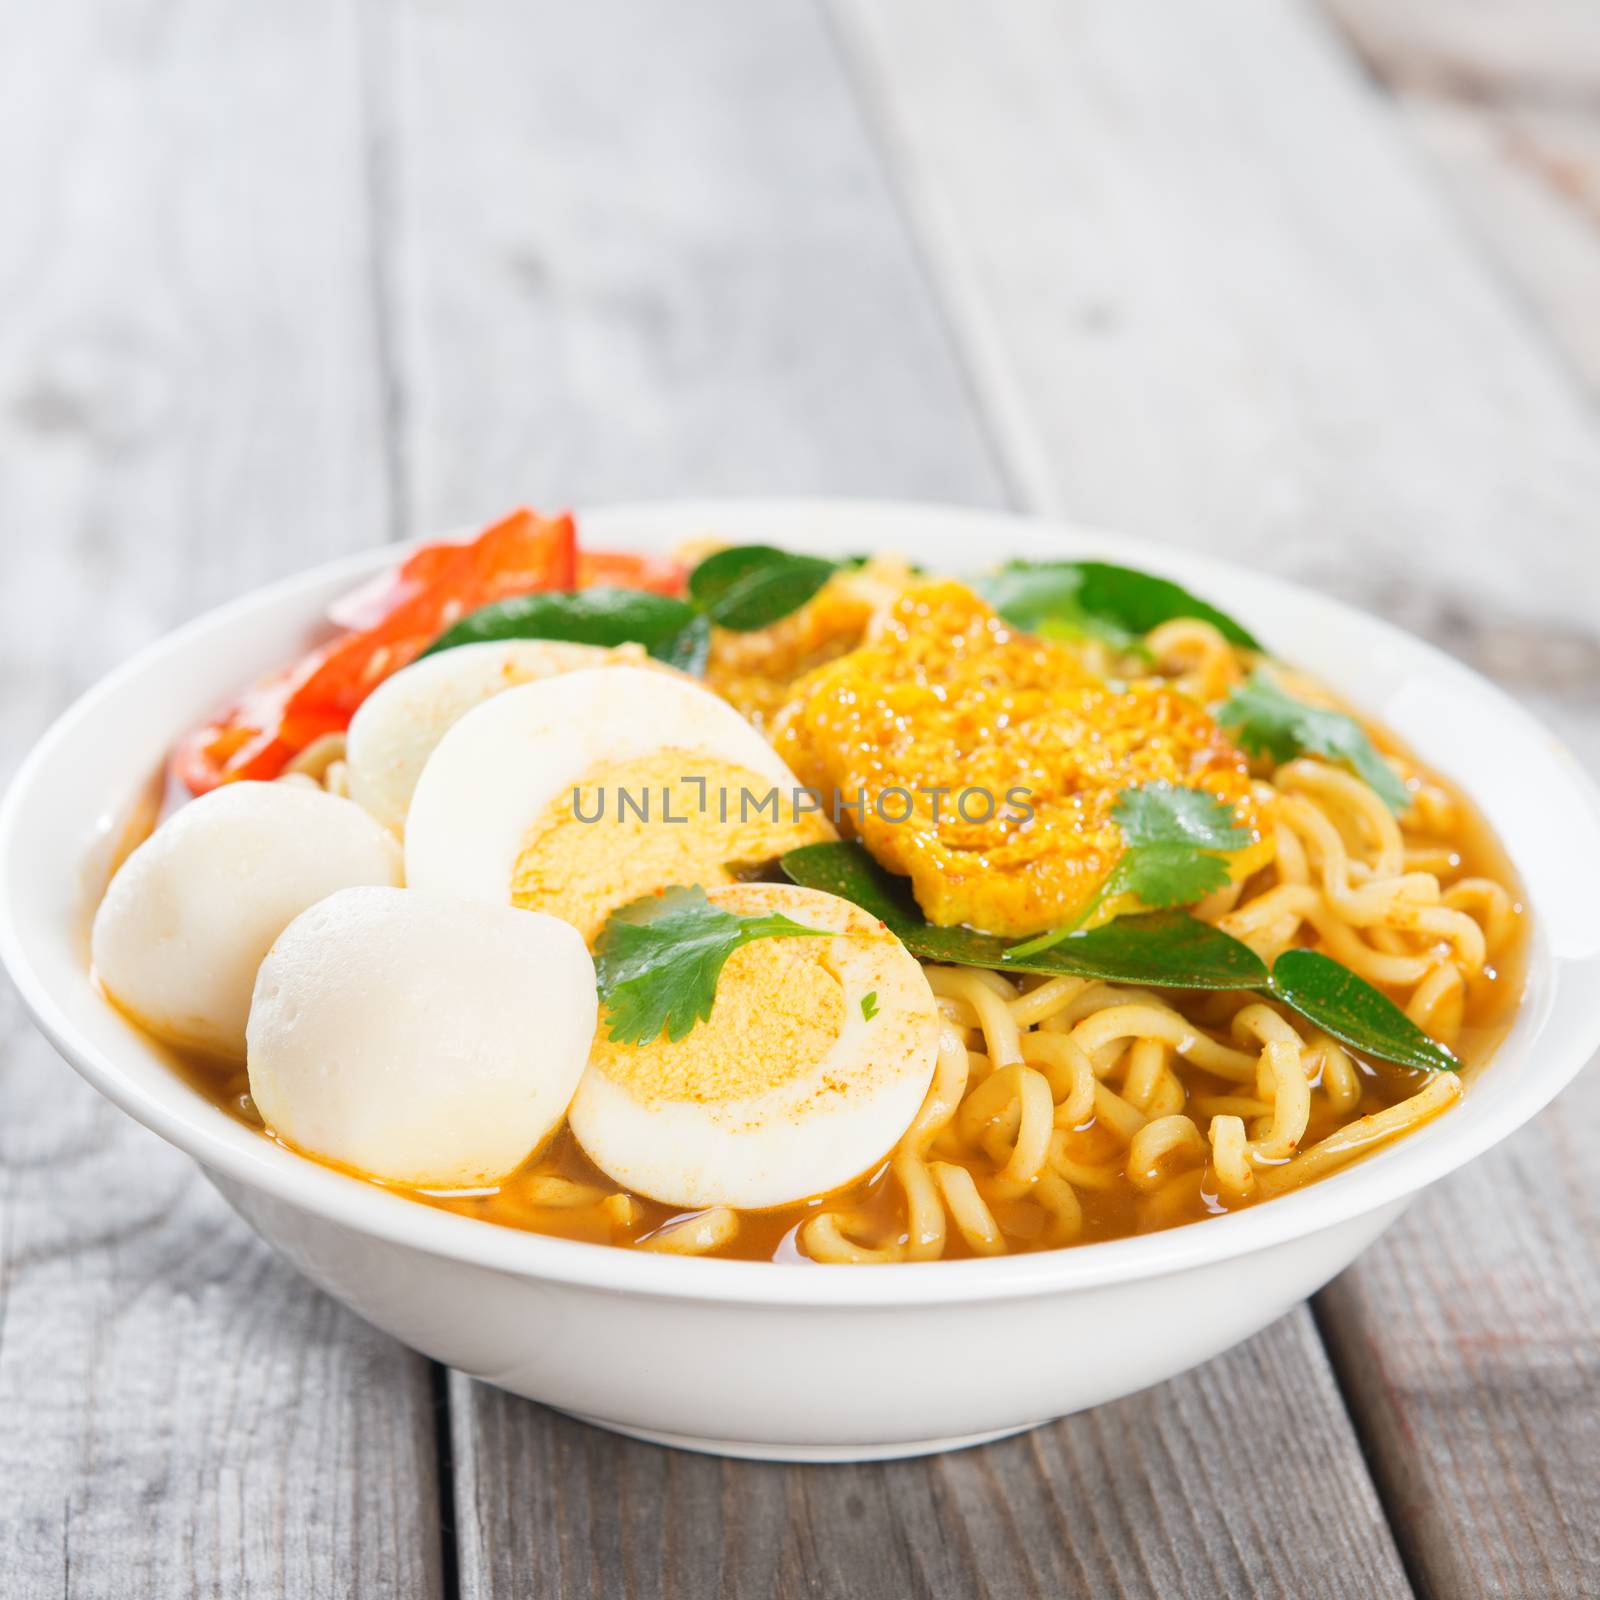 Instant noodles soup, in curry flavour. Hot and spicy.